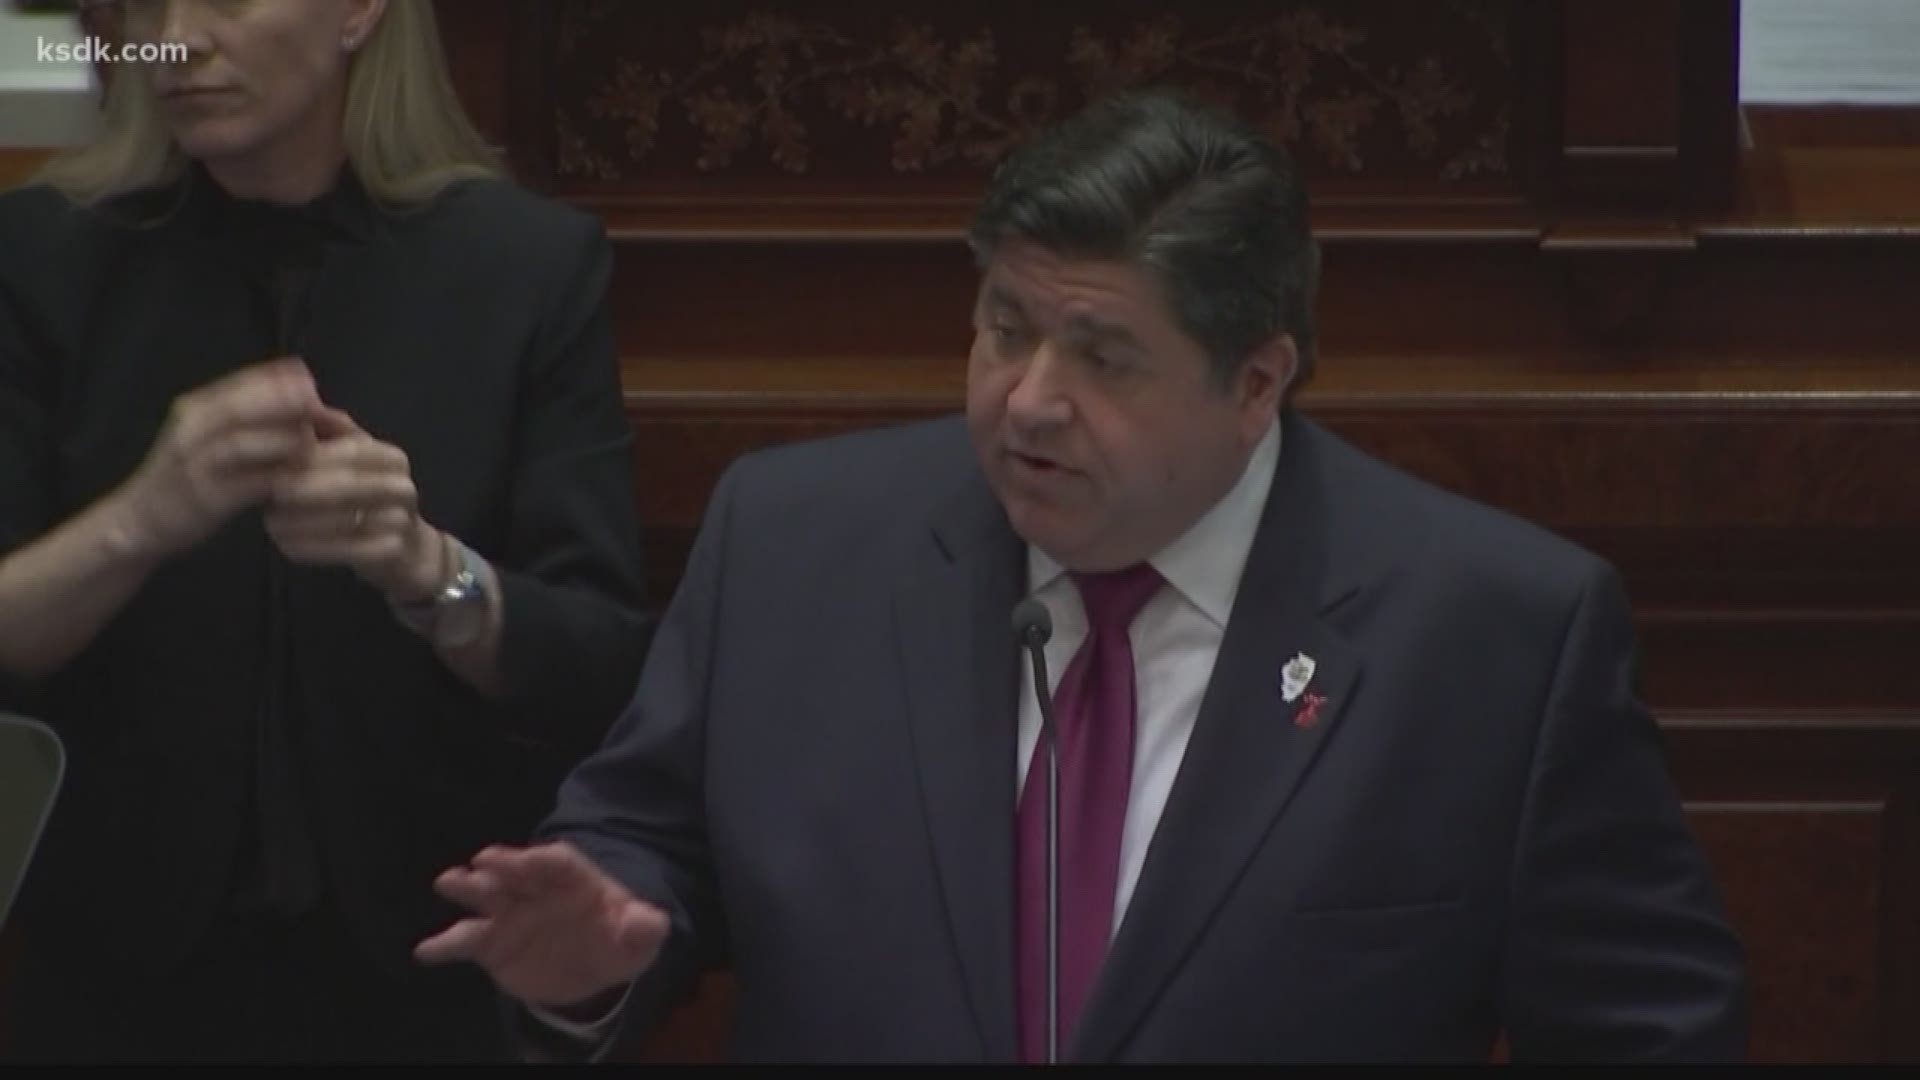 Pritzker has said that legalizing recreational cannabis could generate as much as $1 billion in tax revenue a year.